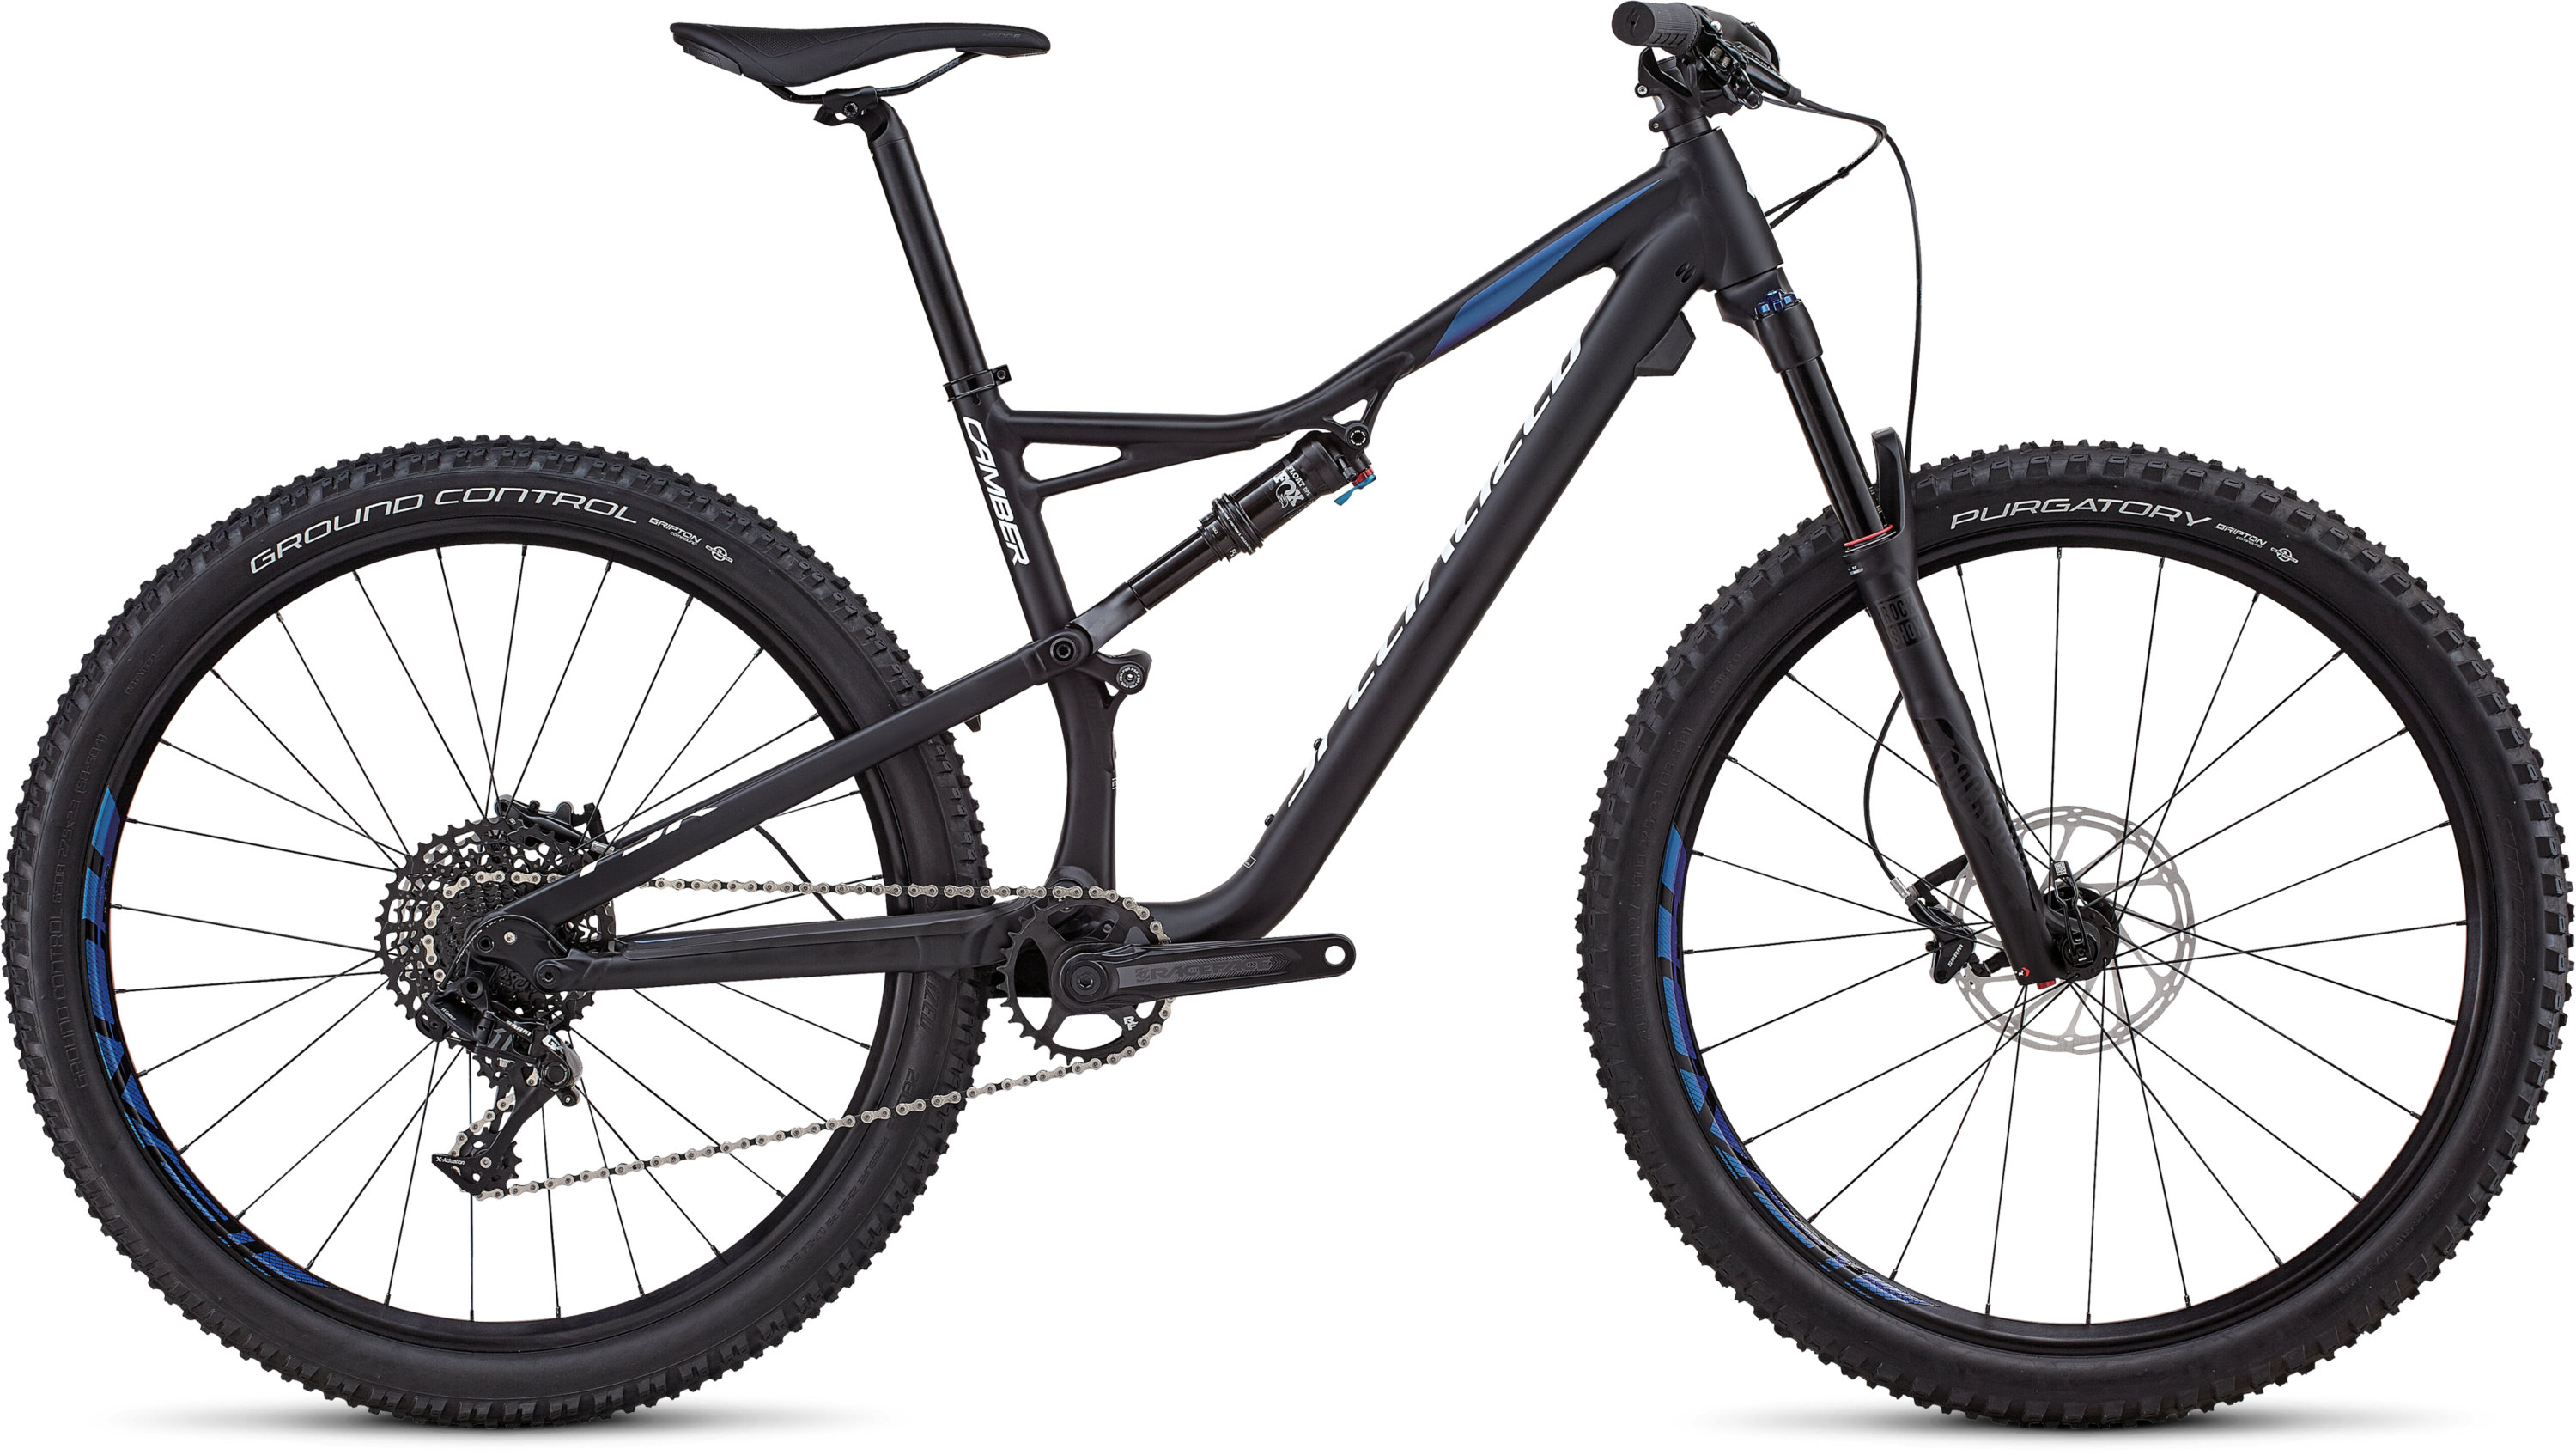 specialized women's camber 27.5